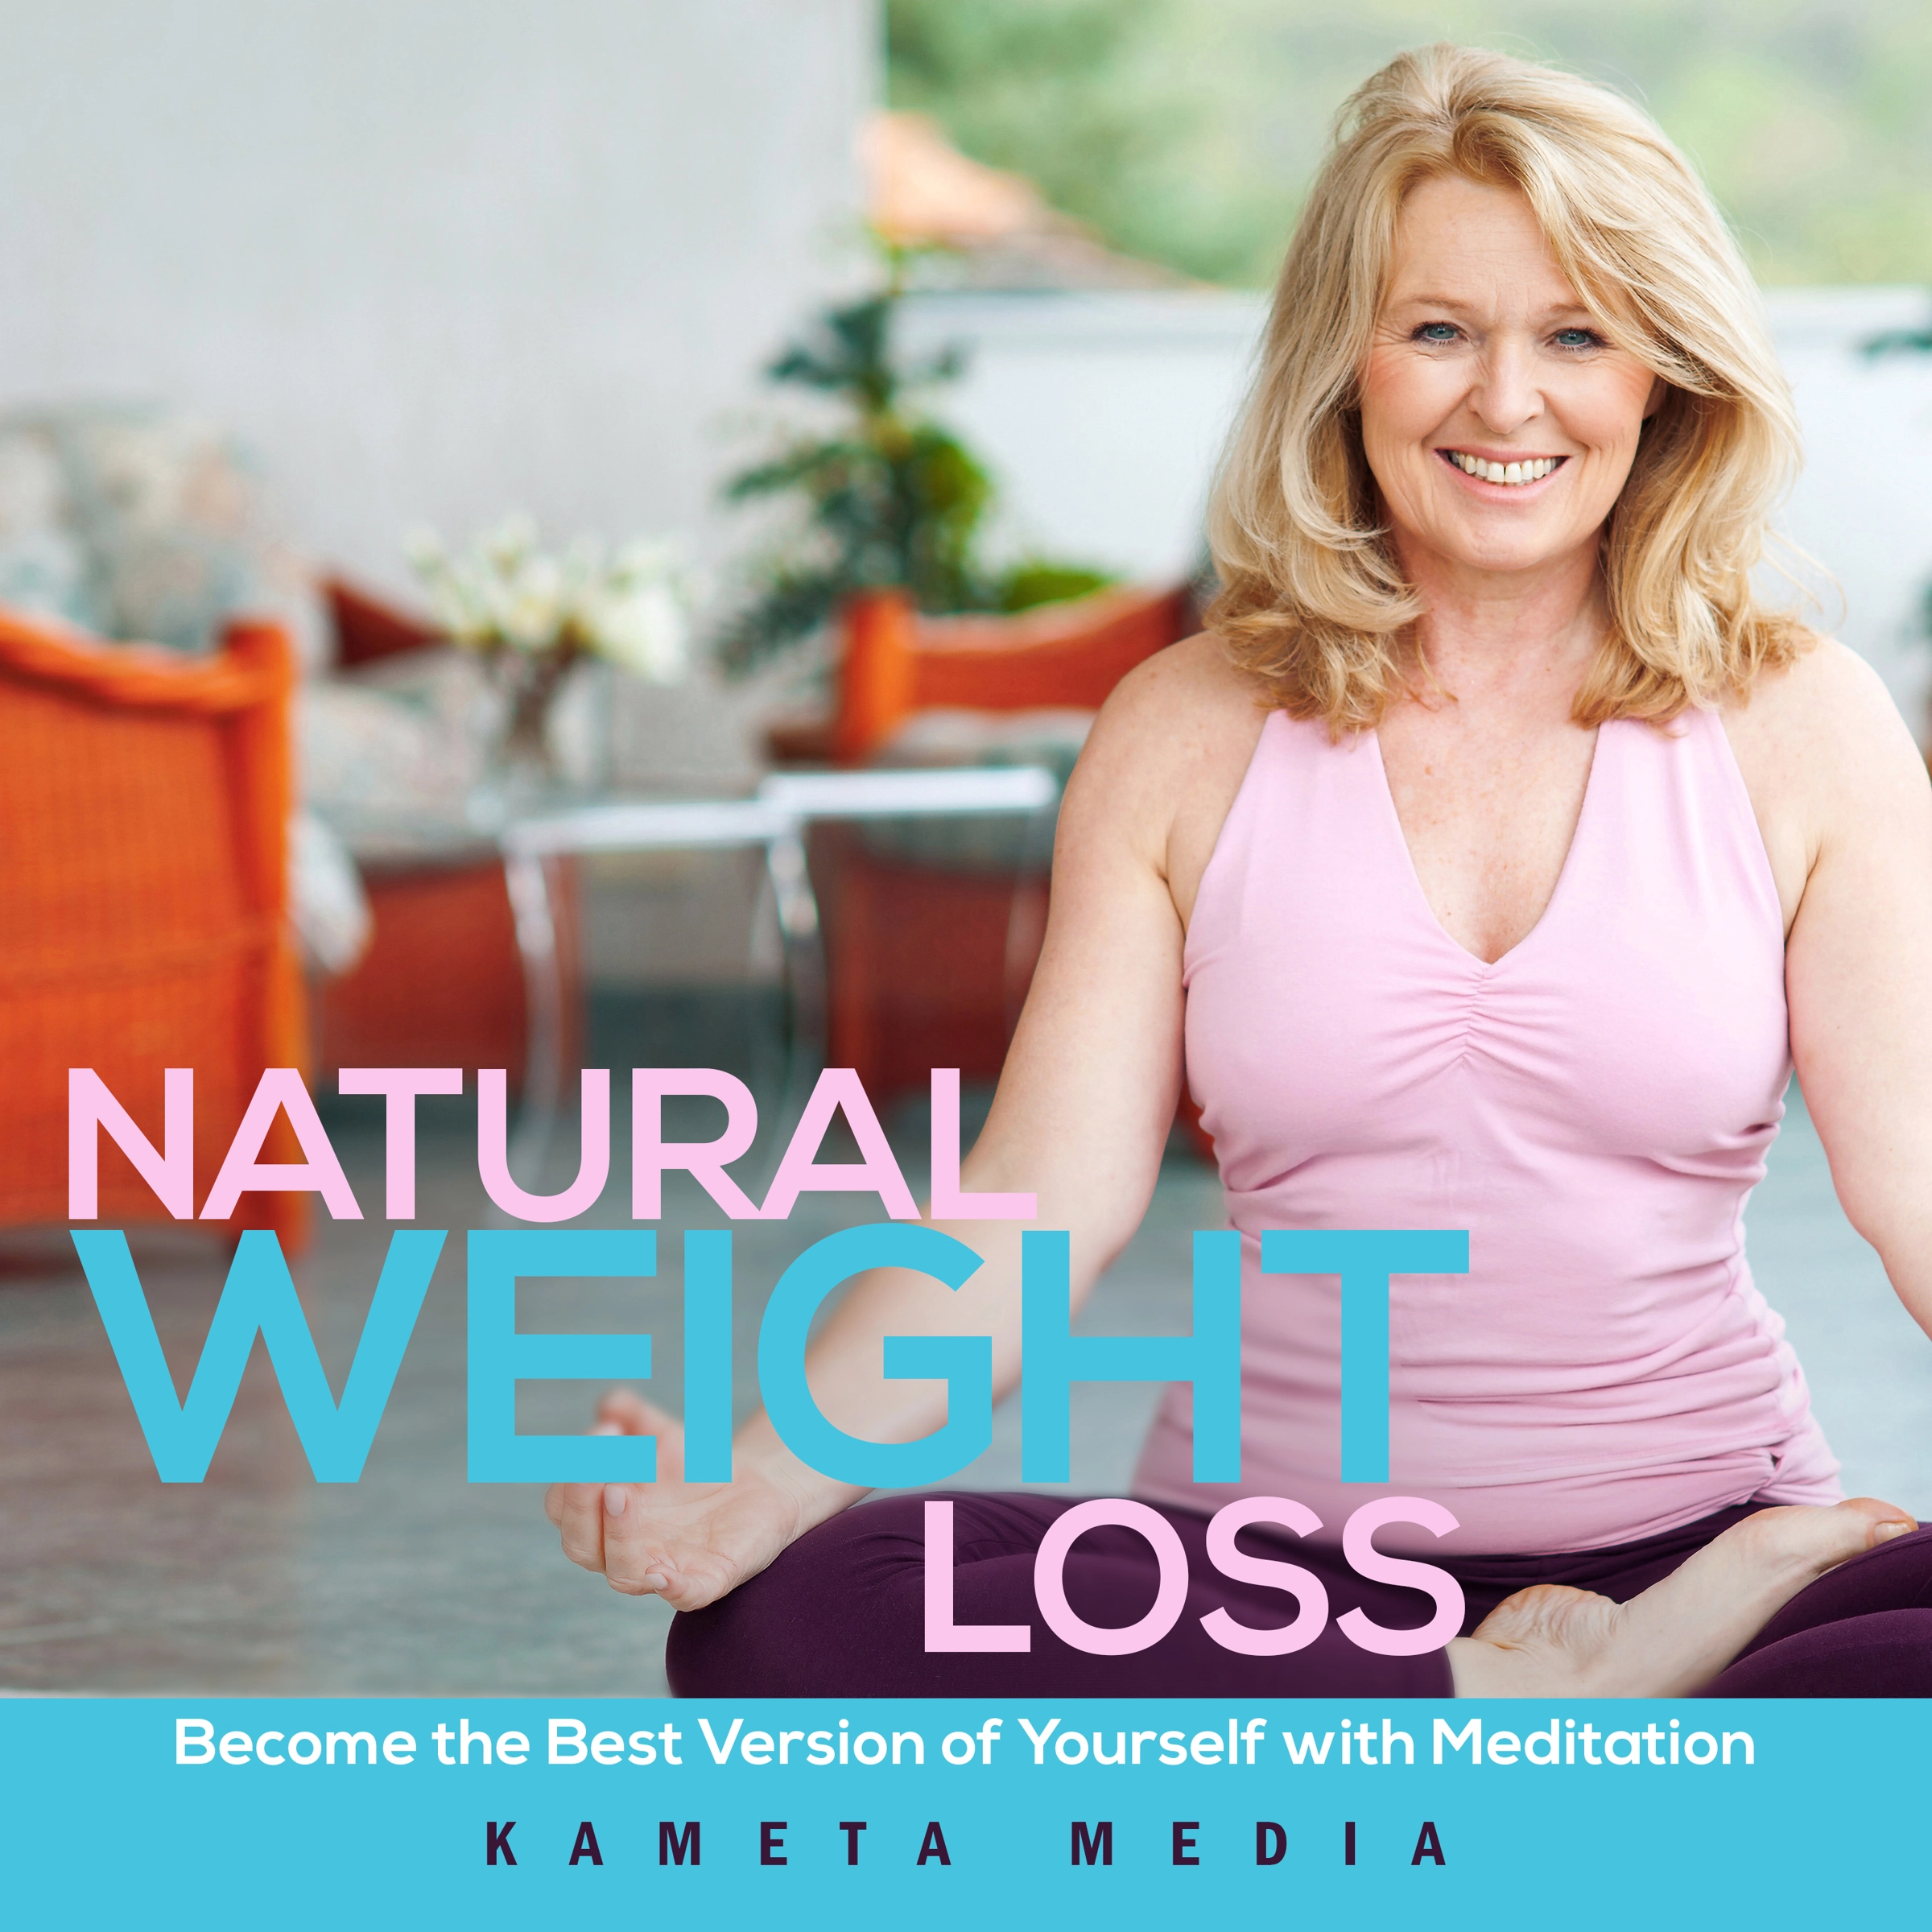 Natural Weight Loss: Become the Best Version of Yourself with Meditation Audiobook by Kameta Media